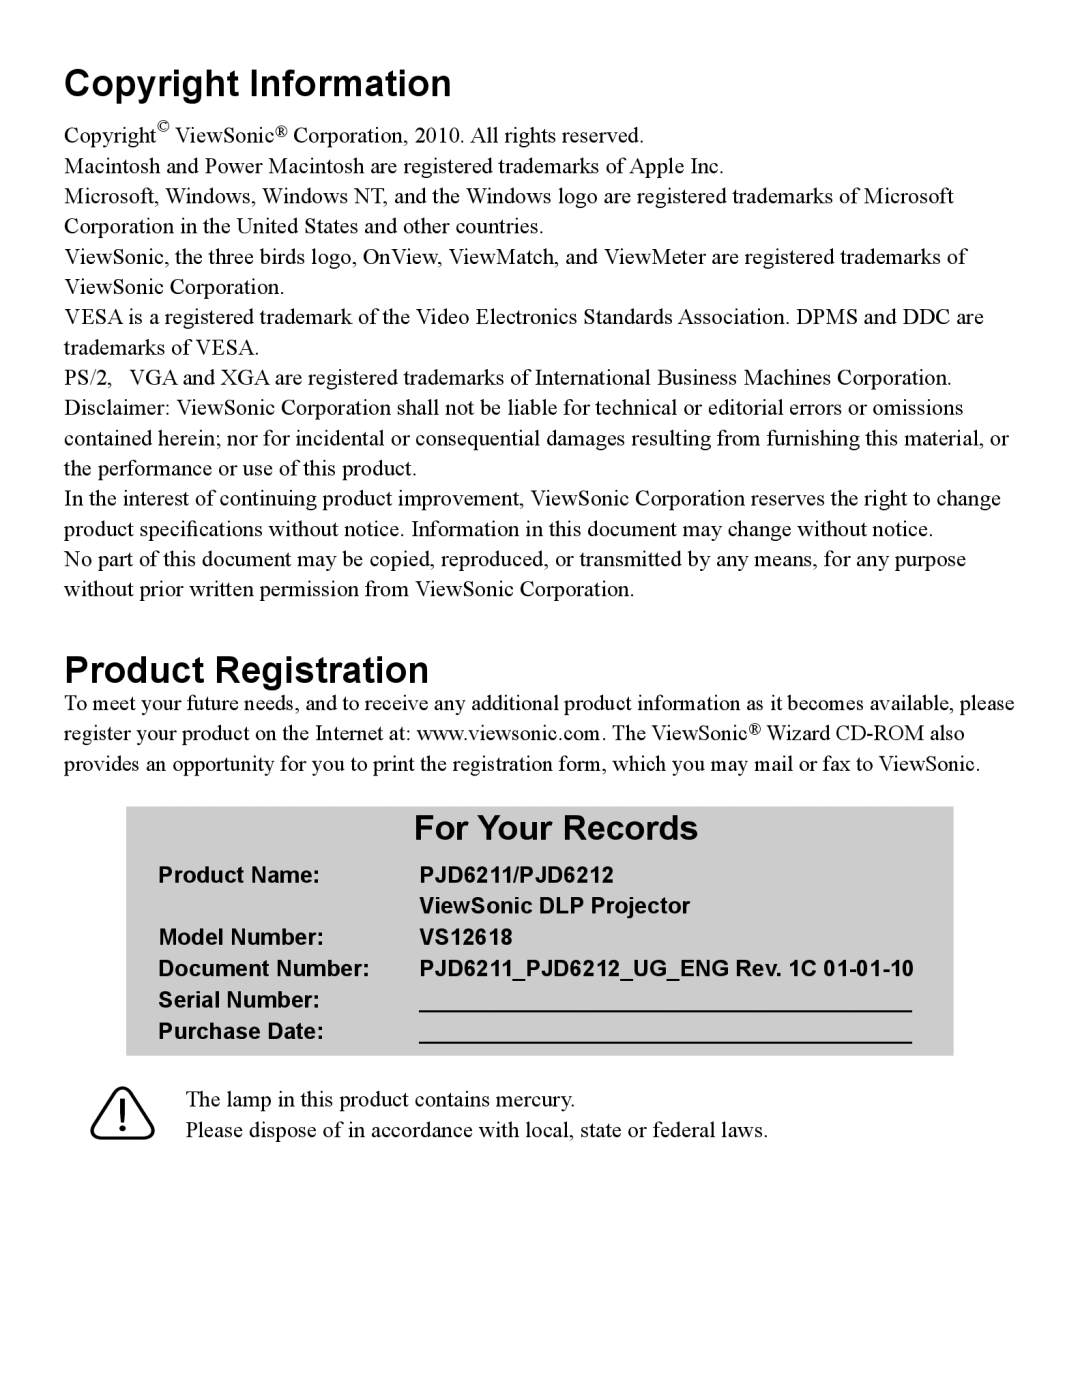 ViewSonic VS12618 warranty Copyright Information, Product Registration, For Your Records, Product Name, PJD6211/PJD6212 